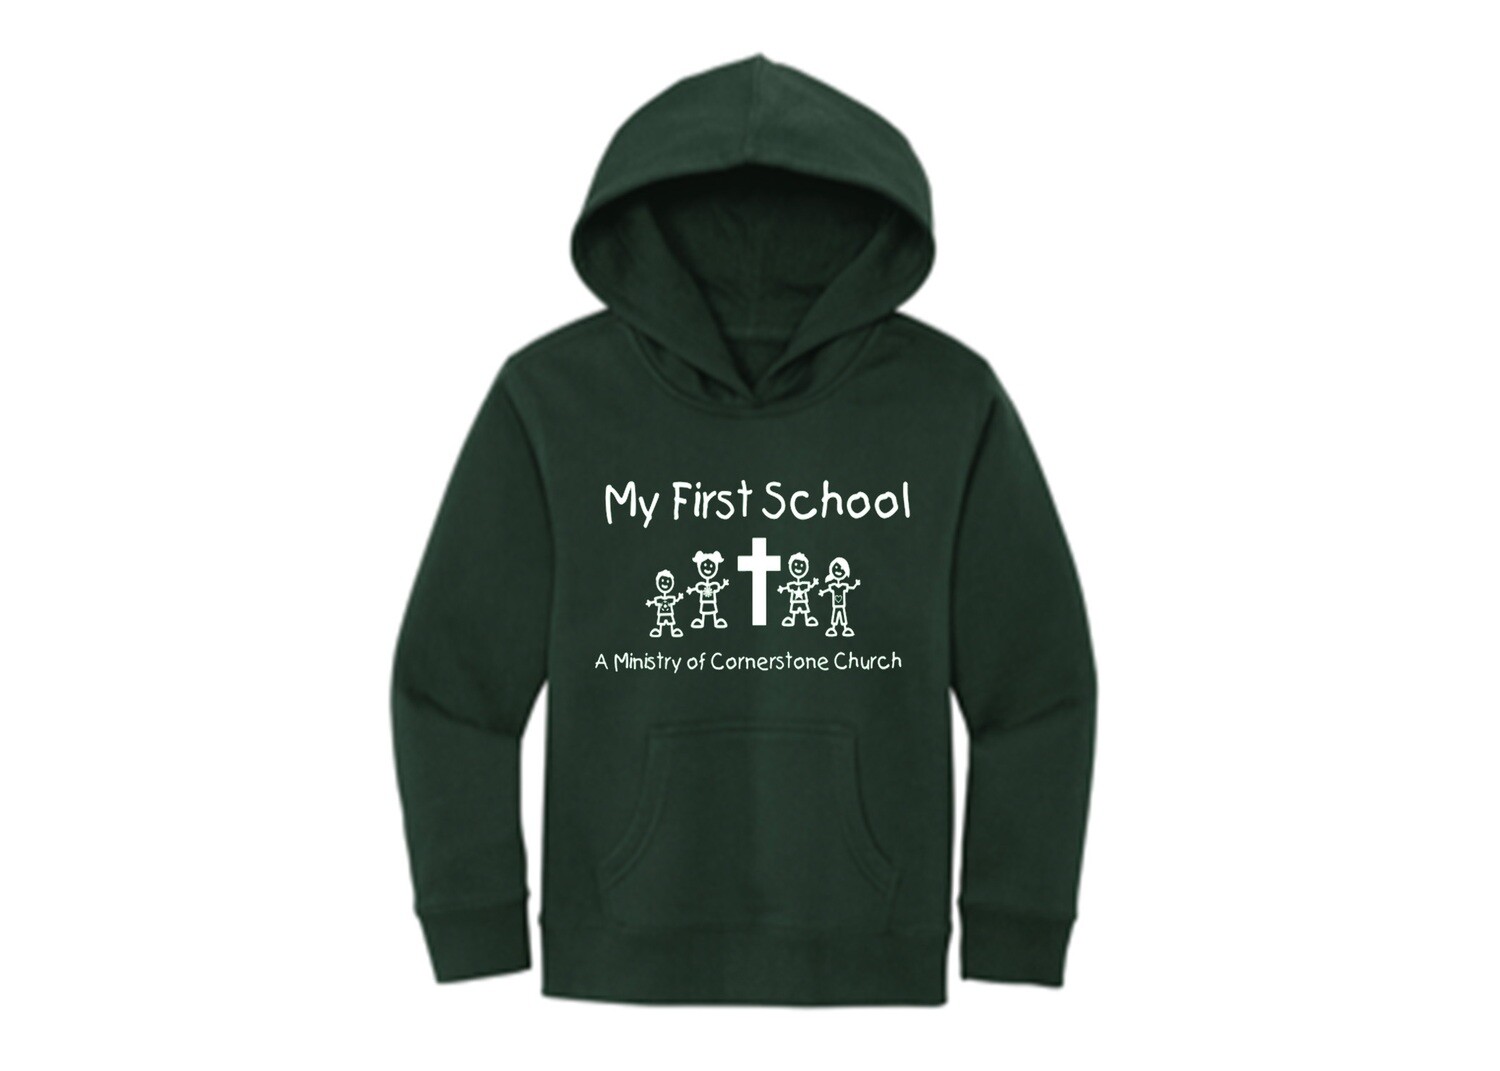 My First School Forest Green Fleece Pullover Hooded Sweatshirt - Youth